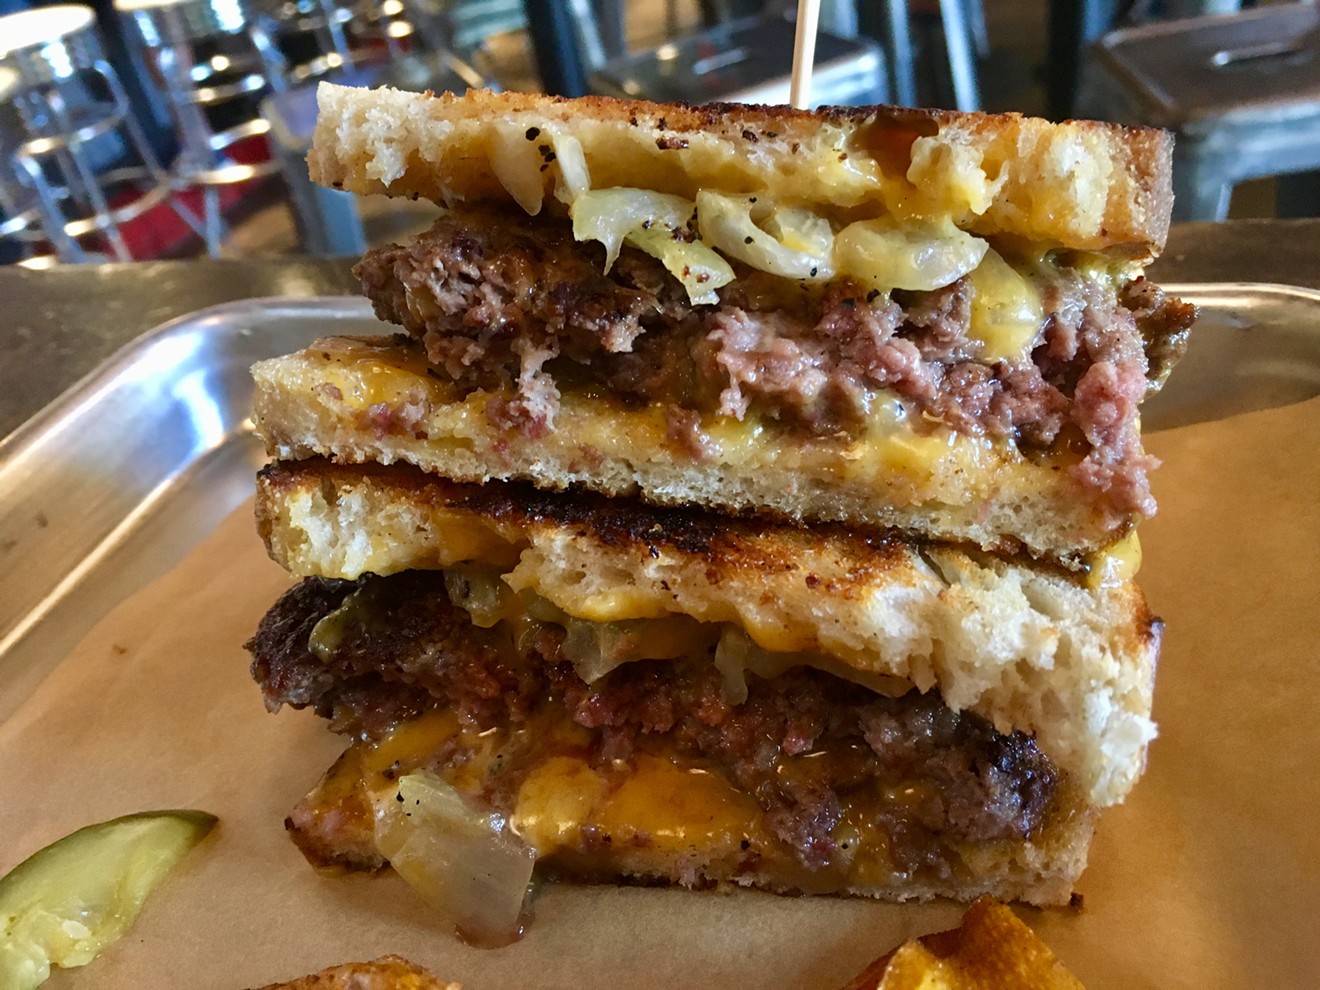 When you find yourself in times of trouble, patty melt will come to you.